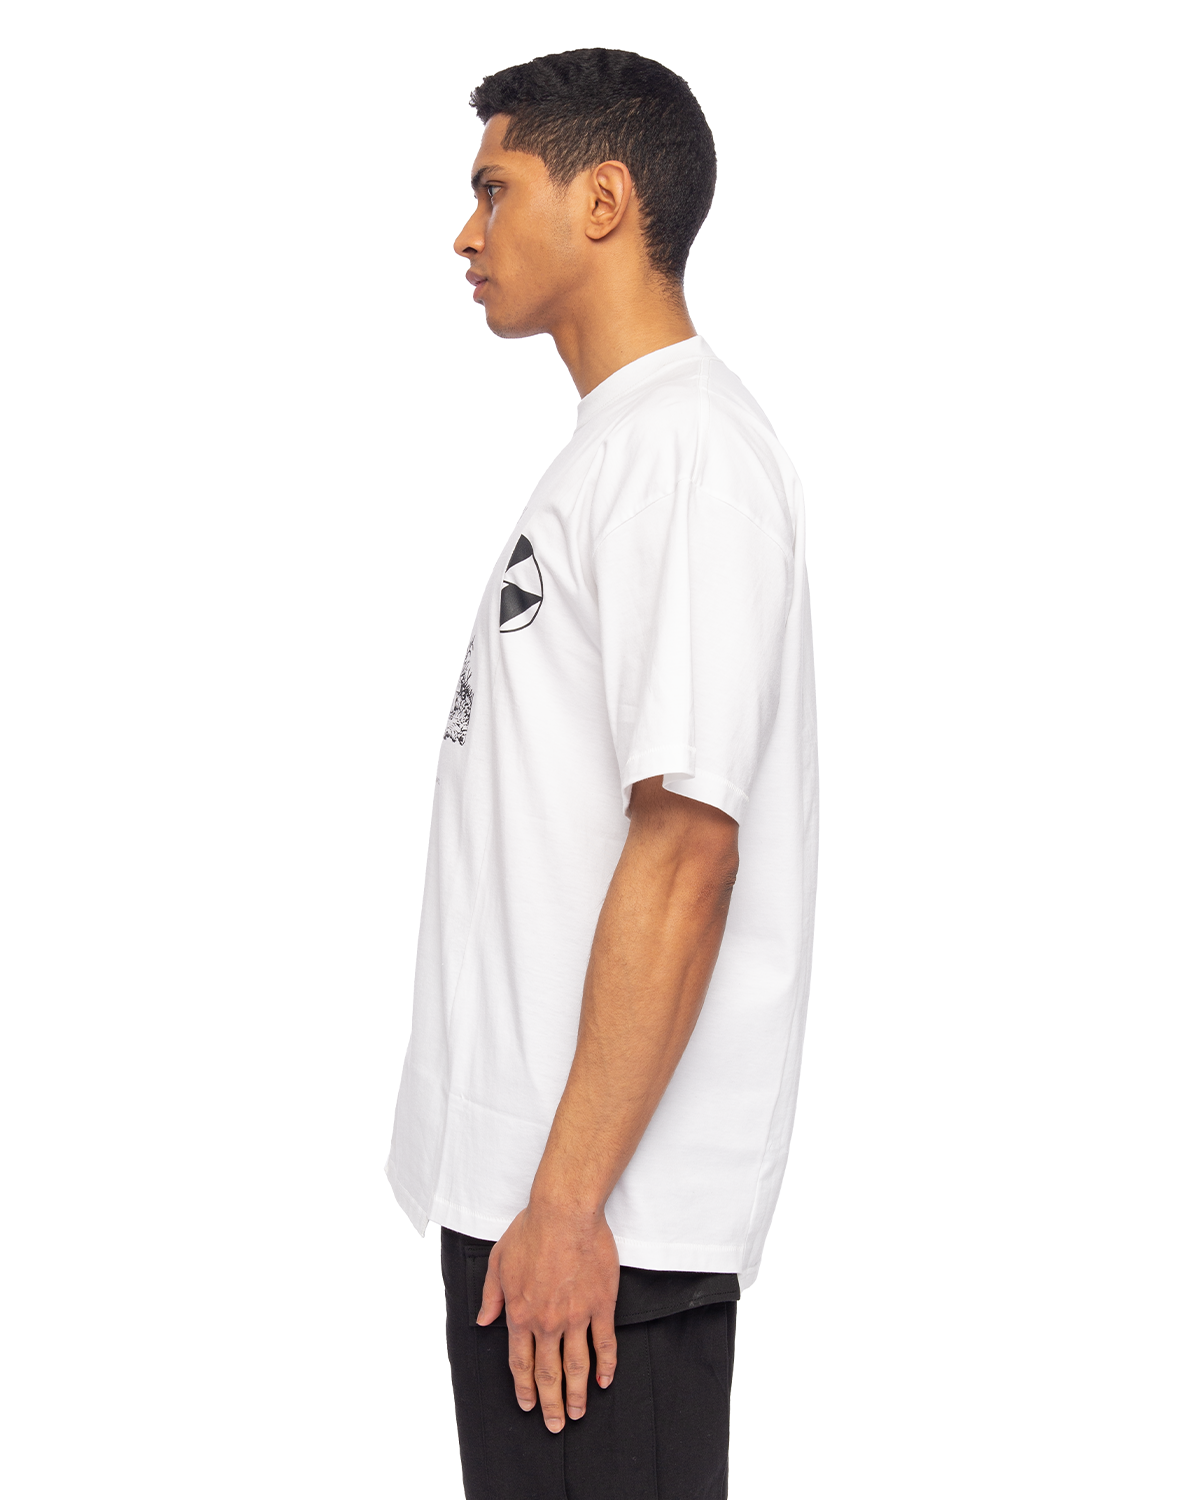 Form & Function SS22 Reconstructed T-Shirt White